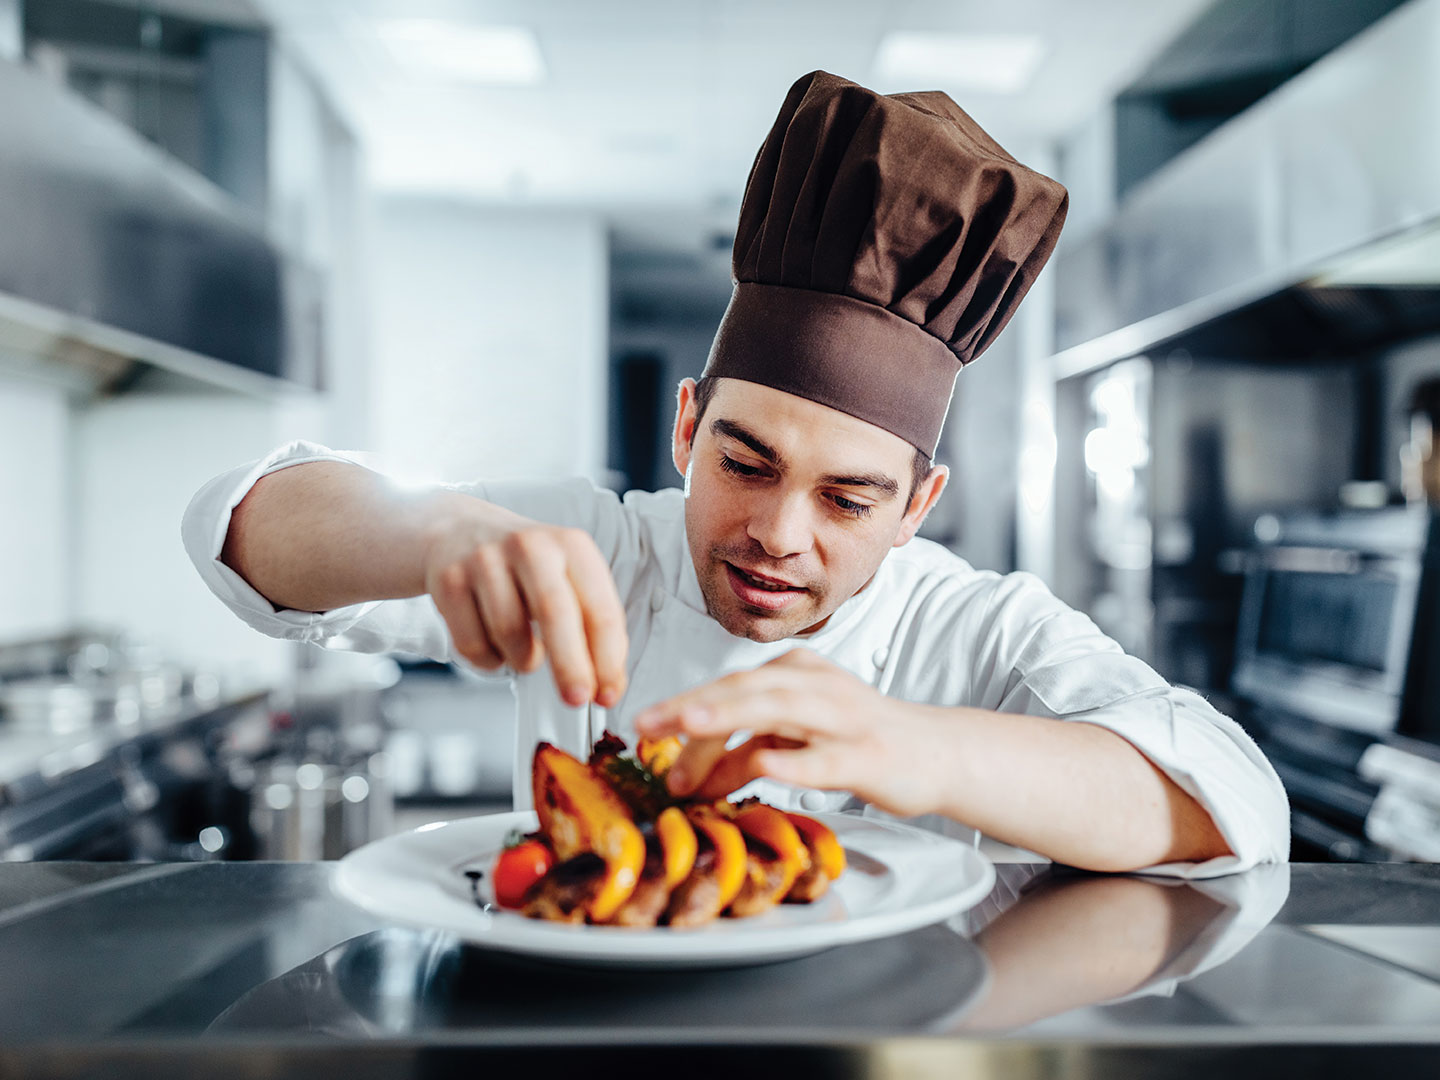 A chef finishes preparing a plate of food for a customer